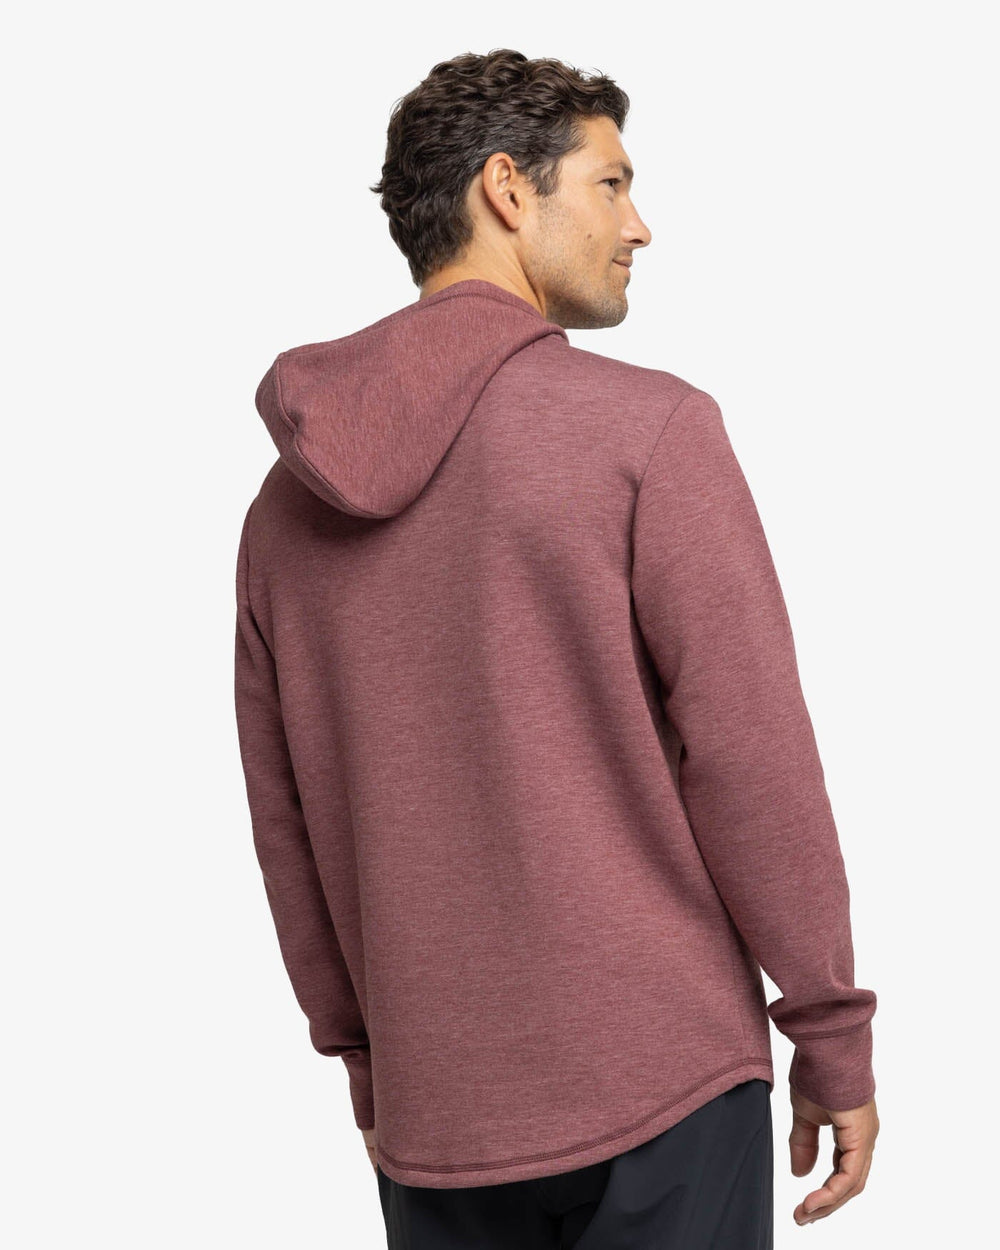 The back view of the Southern Tide Stratford Heather Interlock Hoodie by Southern Tide - Heather Bordeaux Red